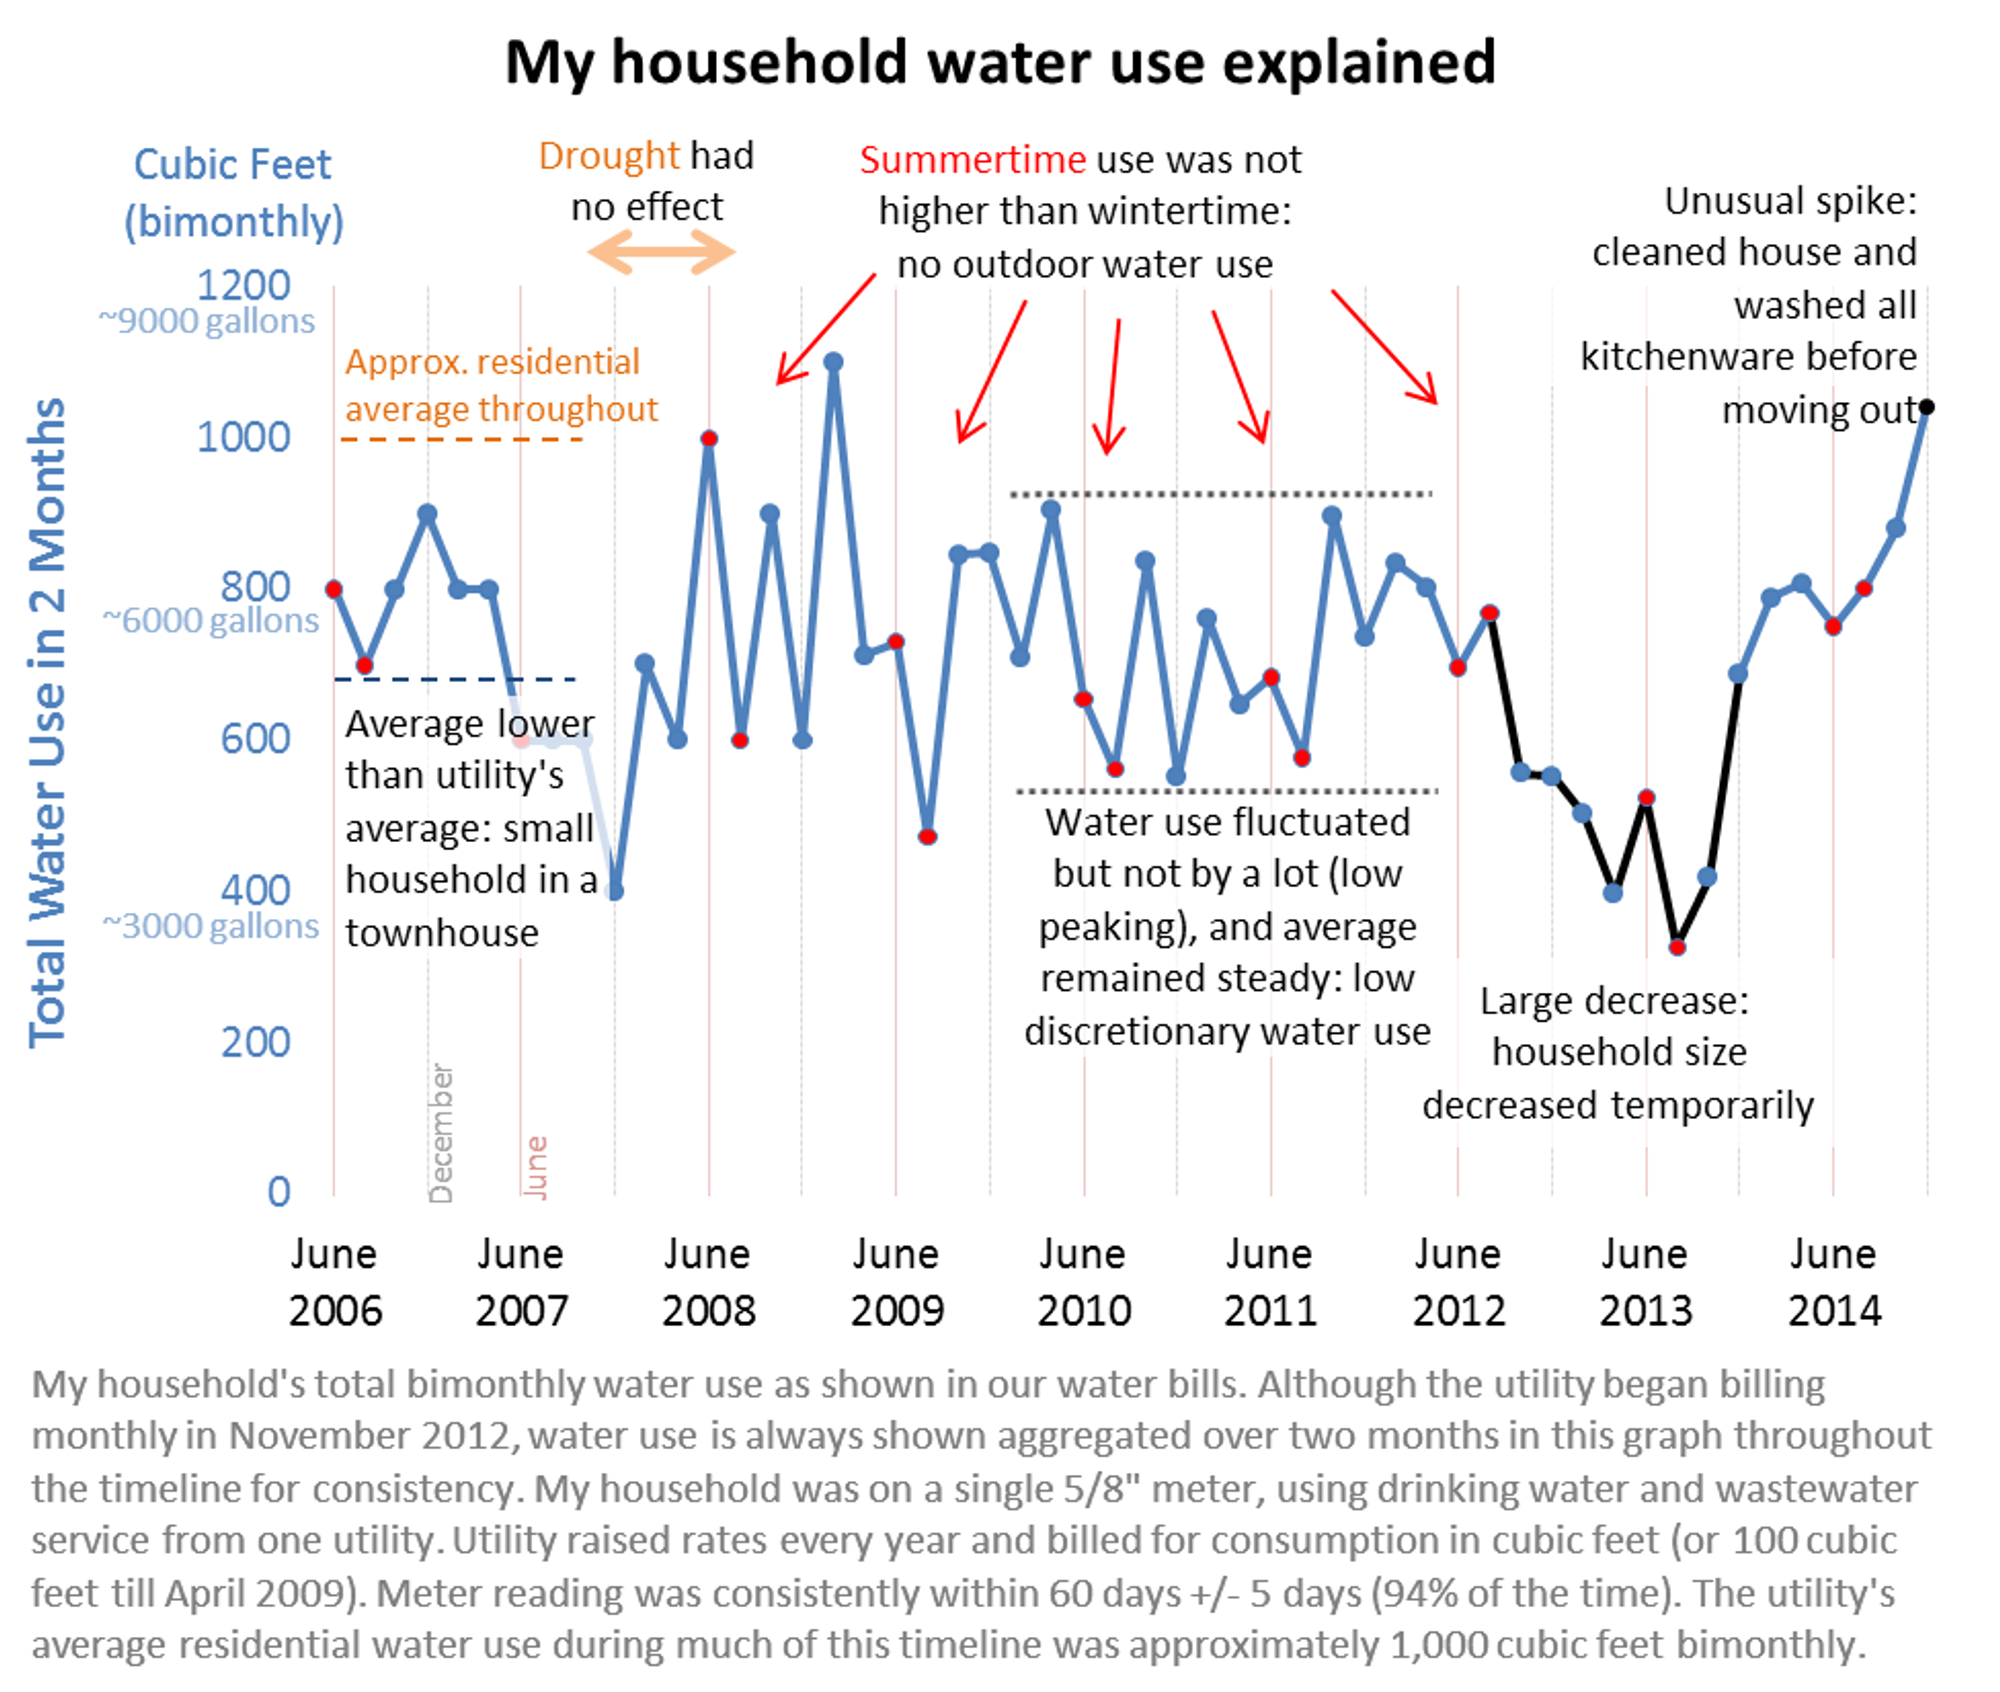 Understanding Customers through their Water Use History